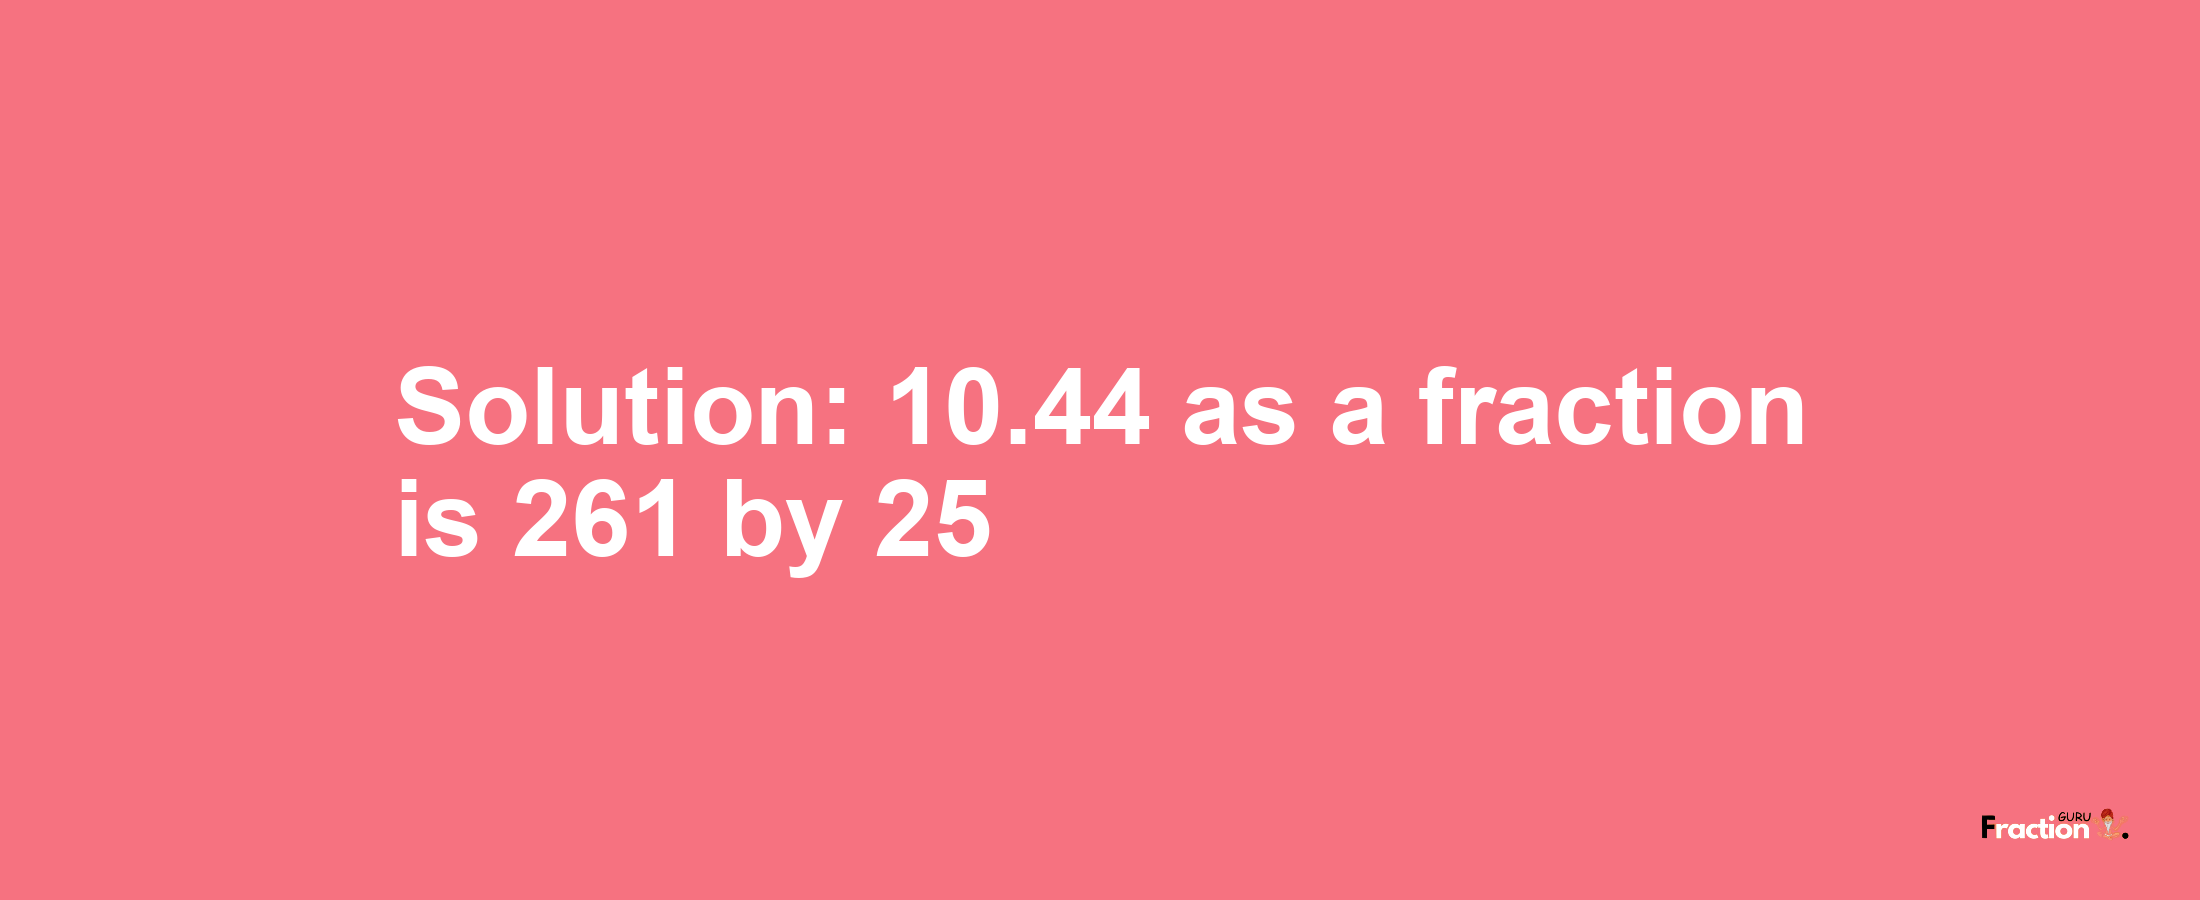 Solution:10.44 as a fraction is 261/25